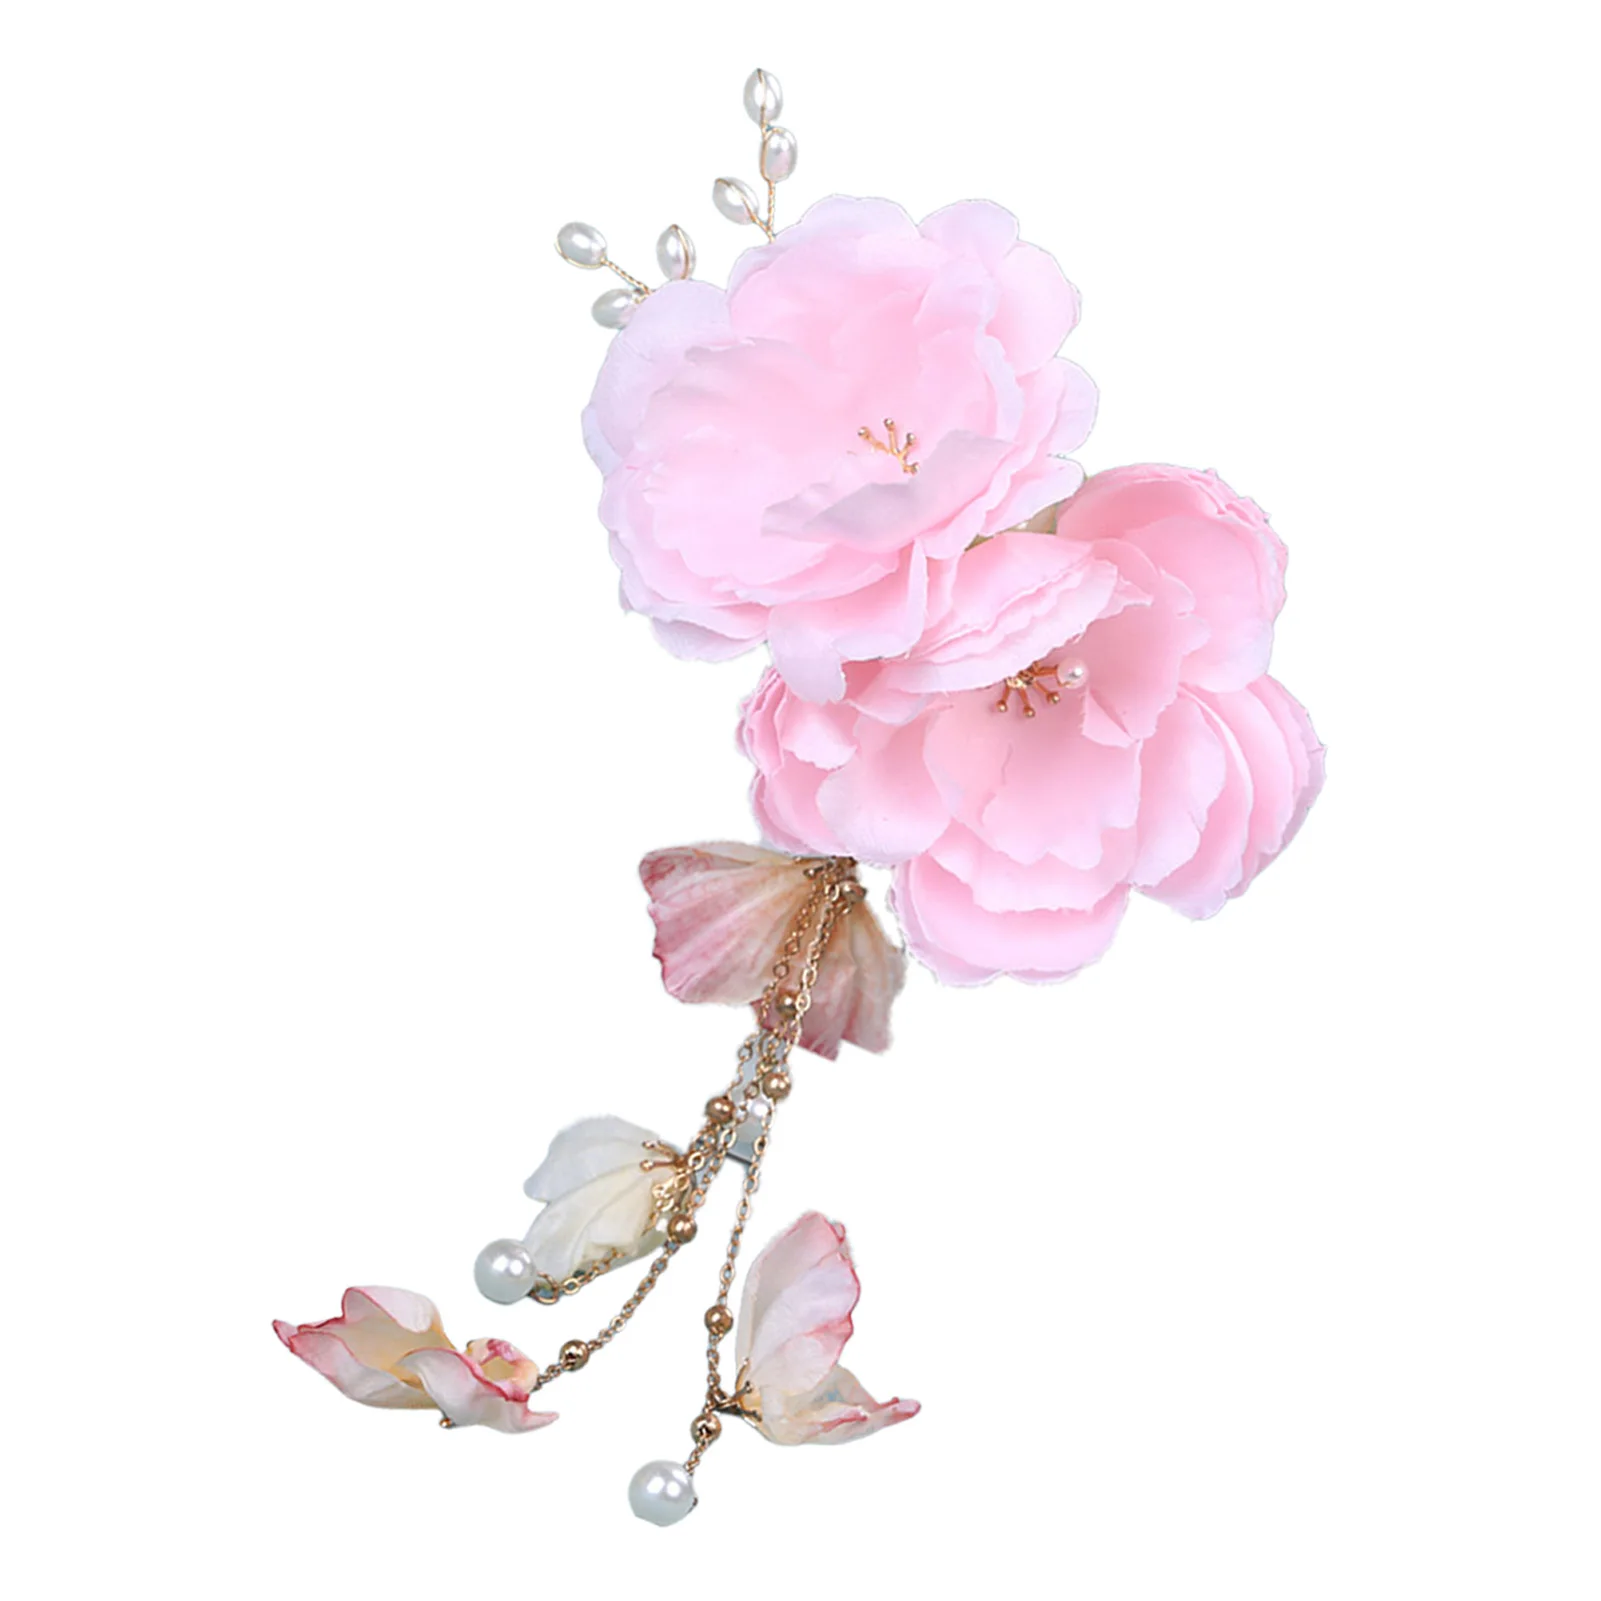 

Silk Flower Woman's Hair Clips Headpiece Personalized Hair Artifact Clip Headdress for Women and Girls Everyday Outfit